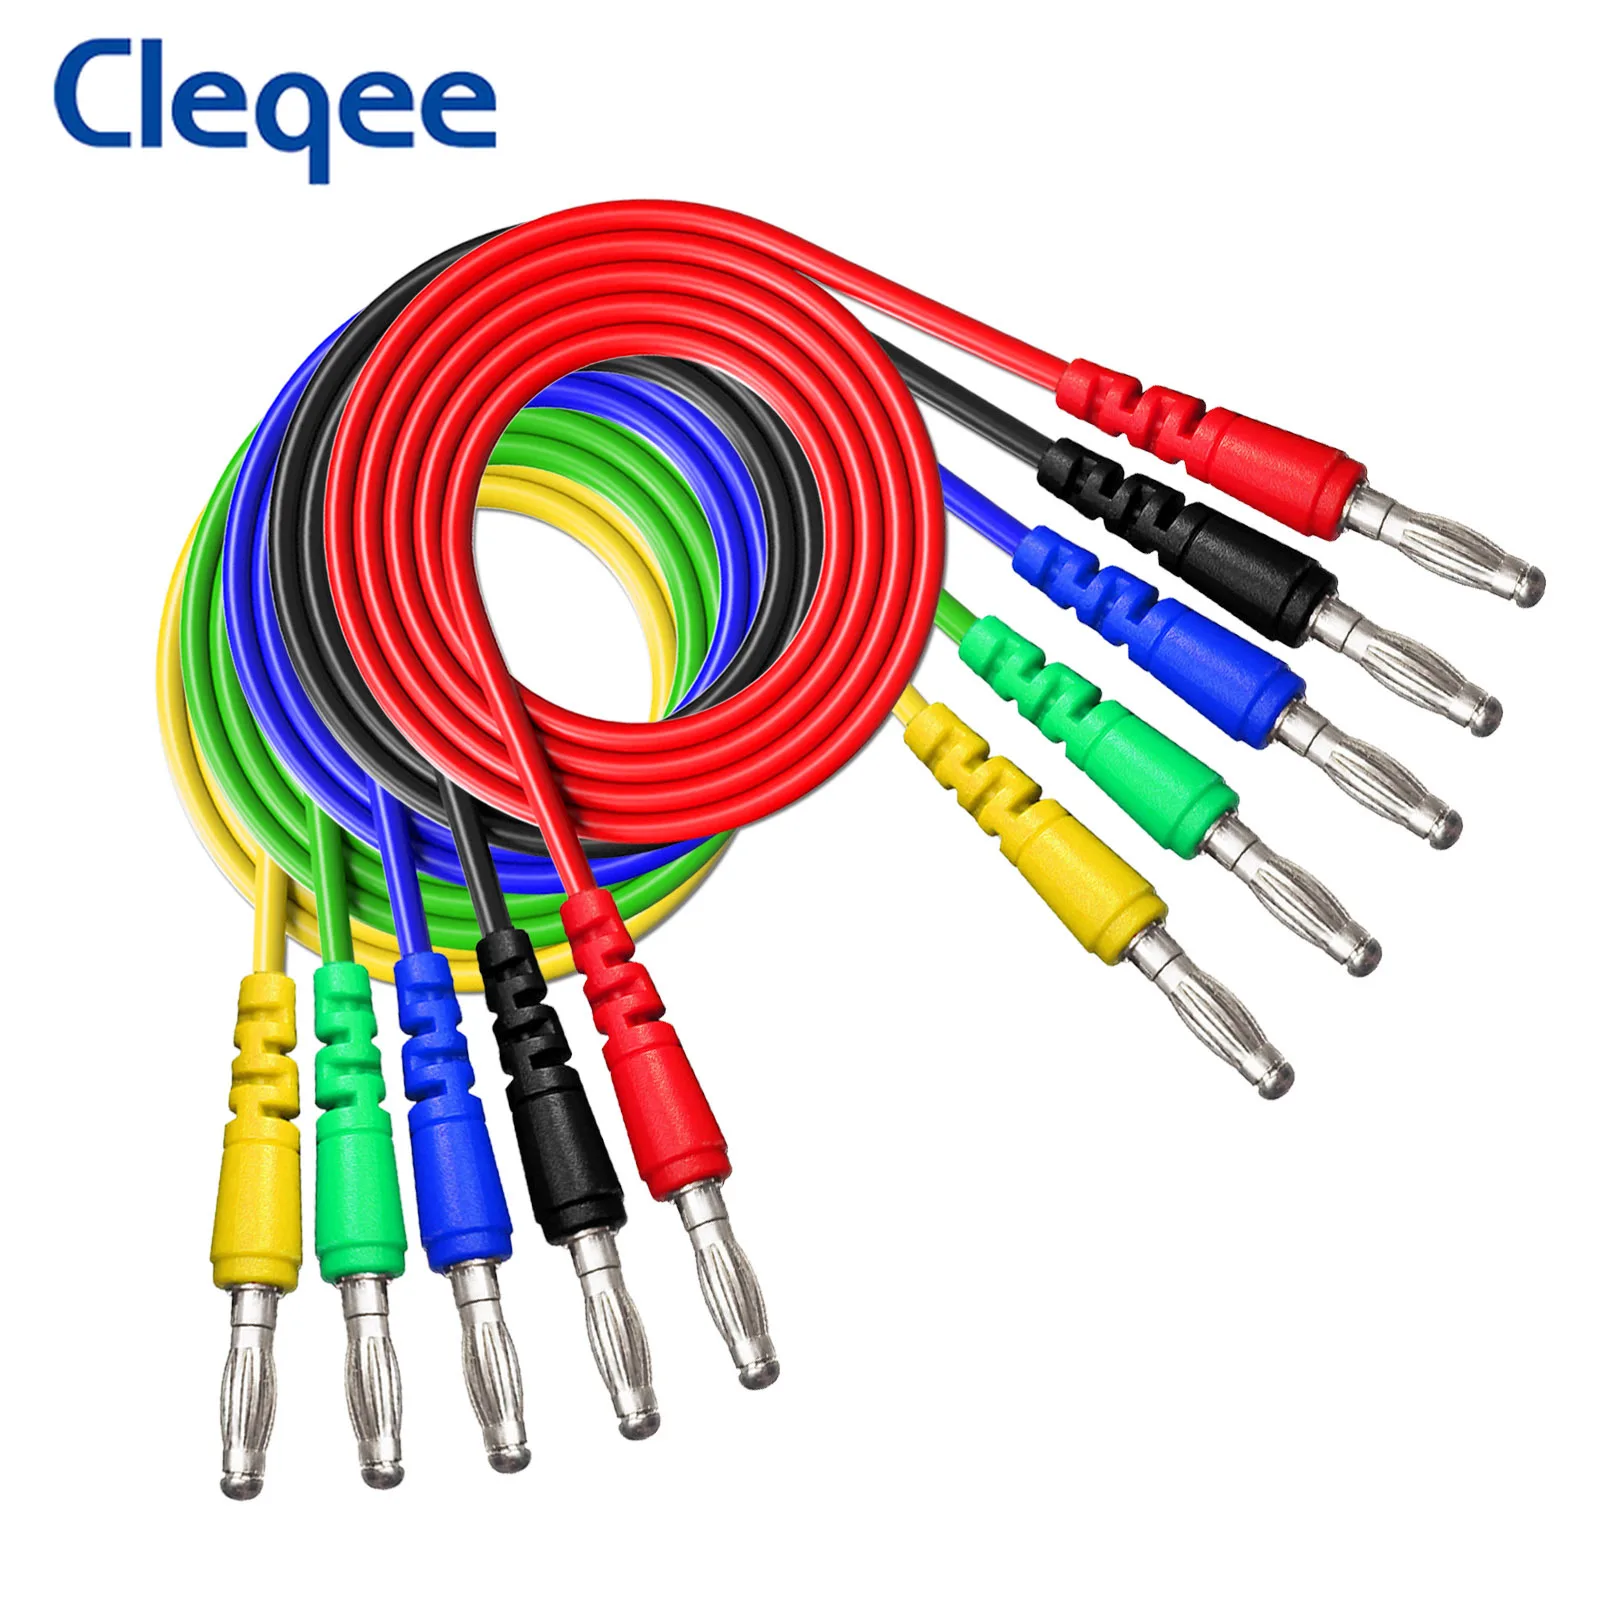 Cleqee P1043  Dual 4mm Copper Banana Plug Multimeter Test Leads Insulated PVC 1000V/10A 1M Wire Cable Bare Plug DIY